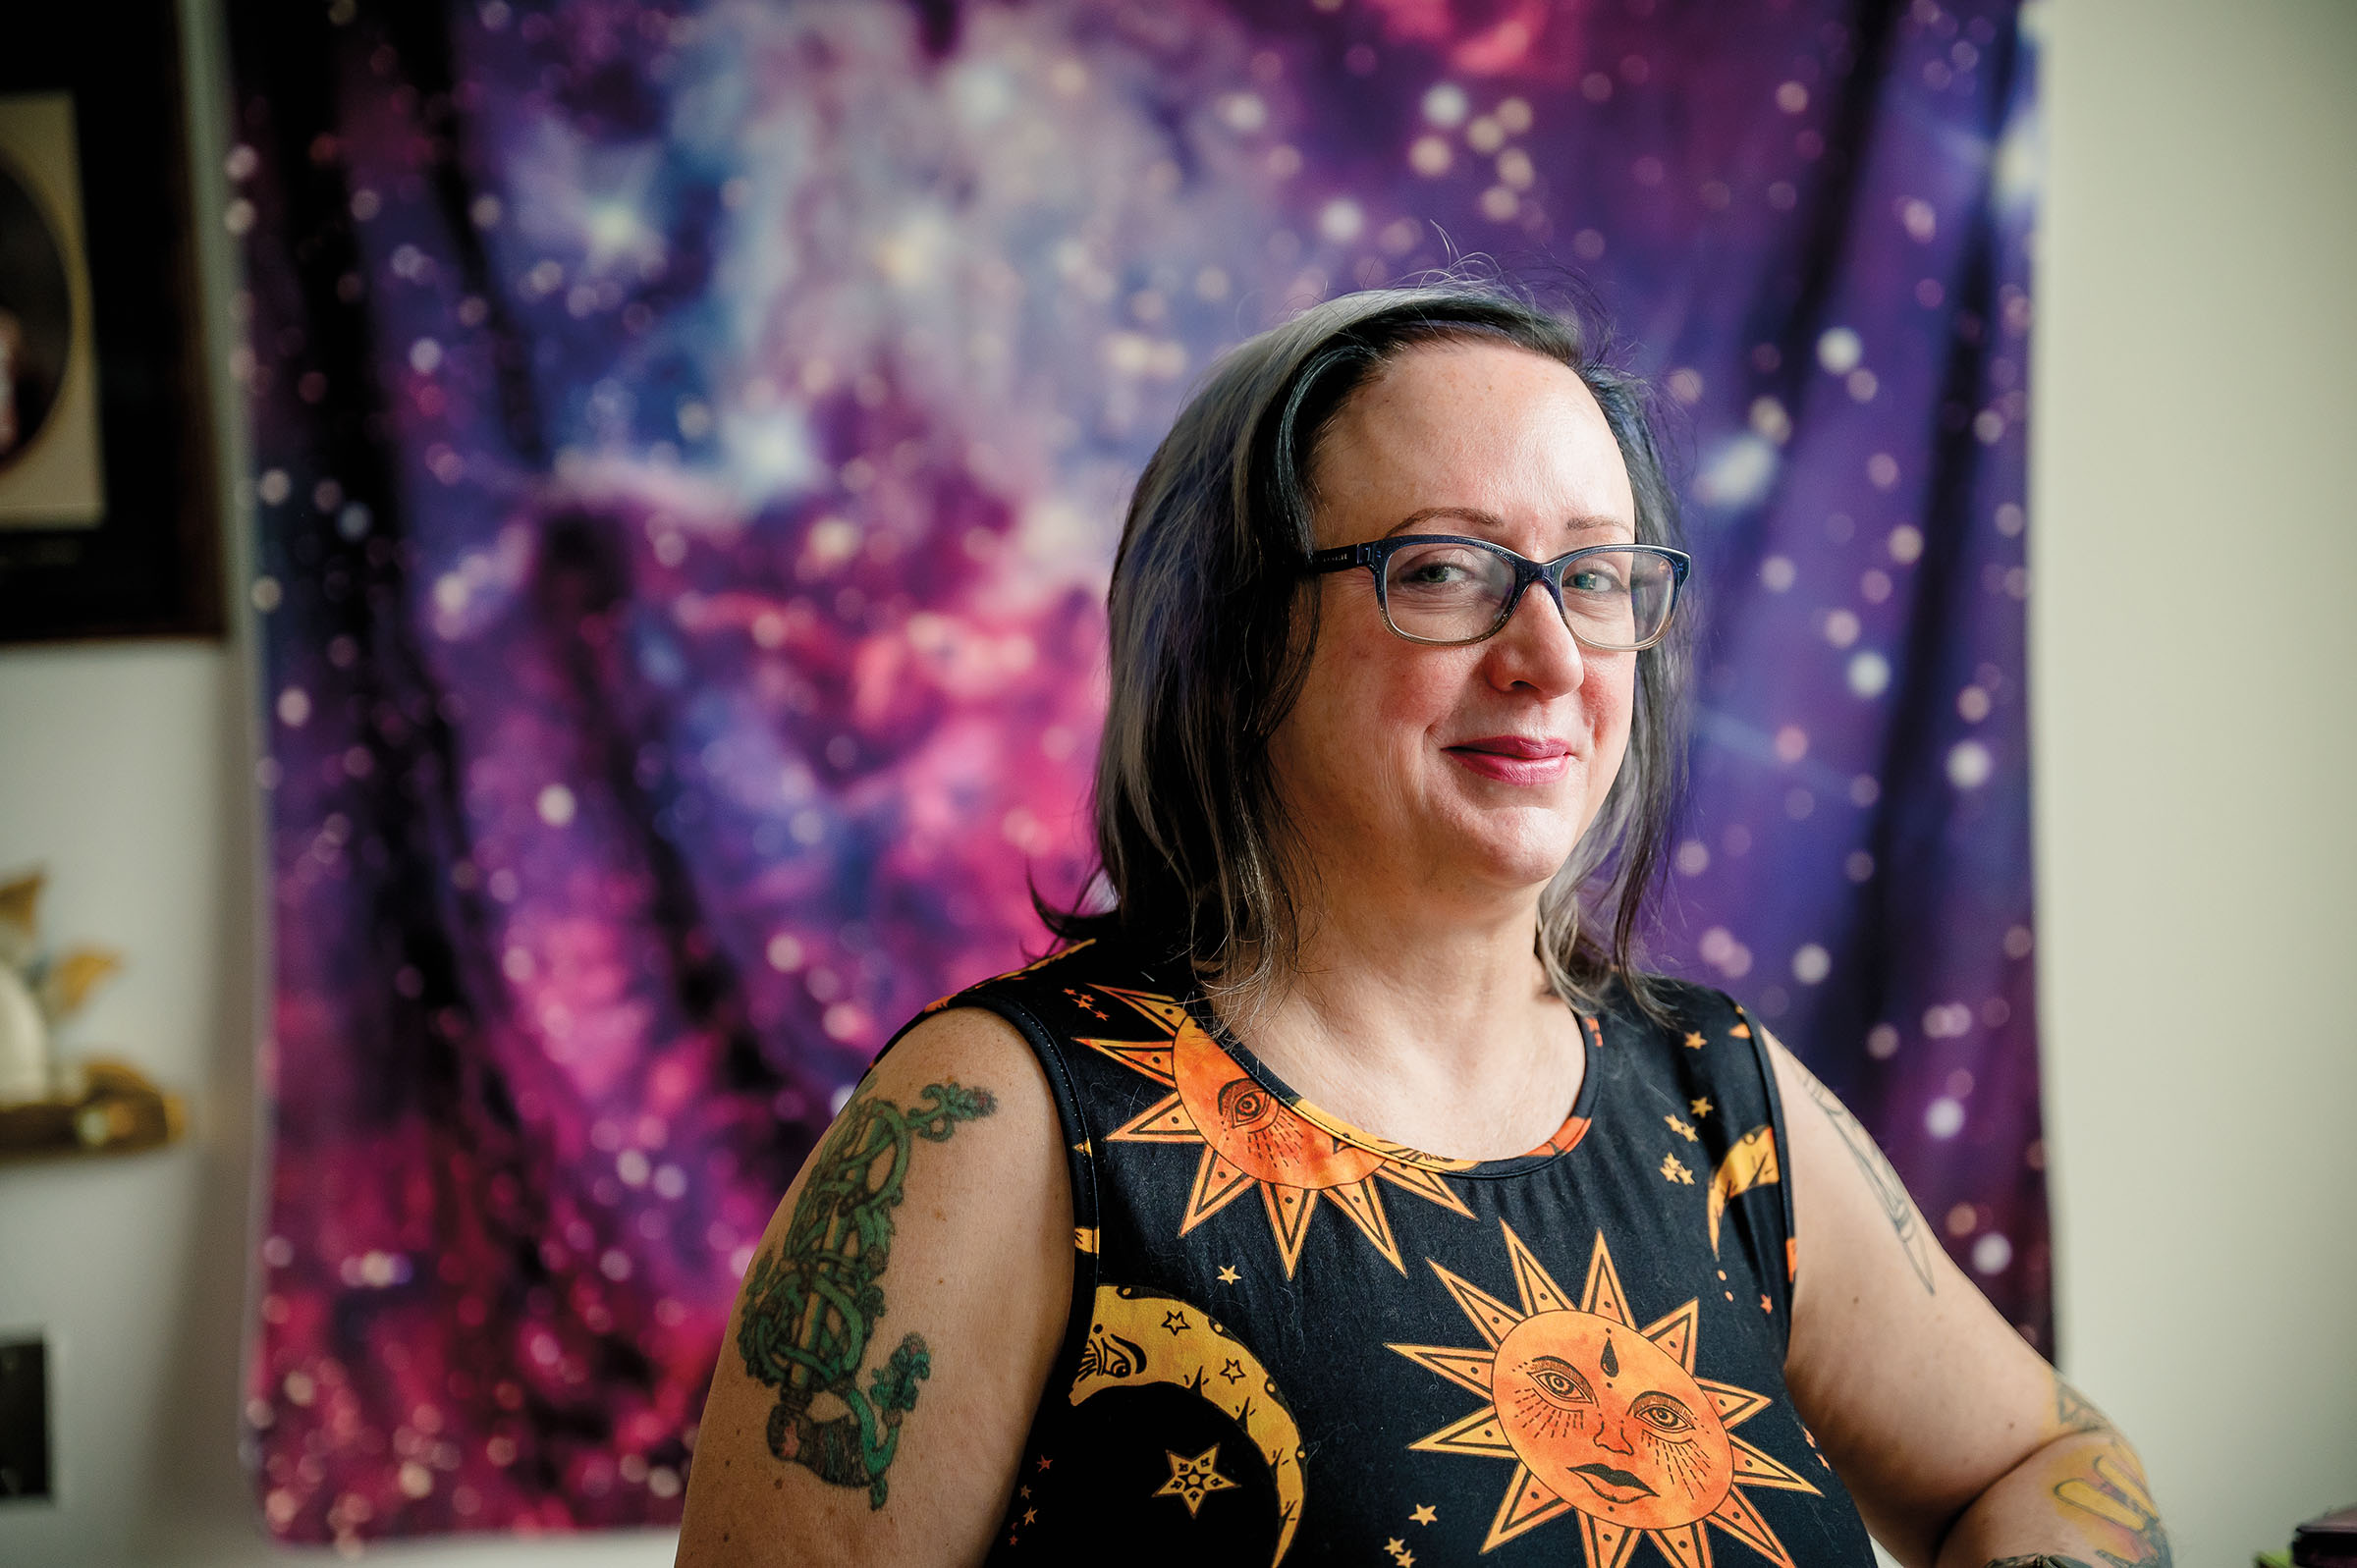 A woman in a sun and moon shirt stands in front of a large purple and stars-themed tapestry